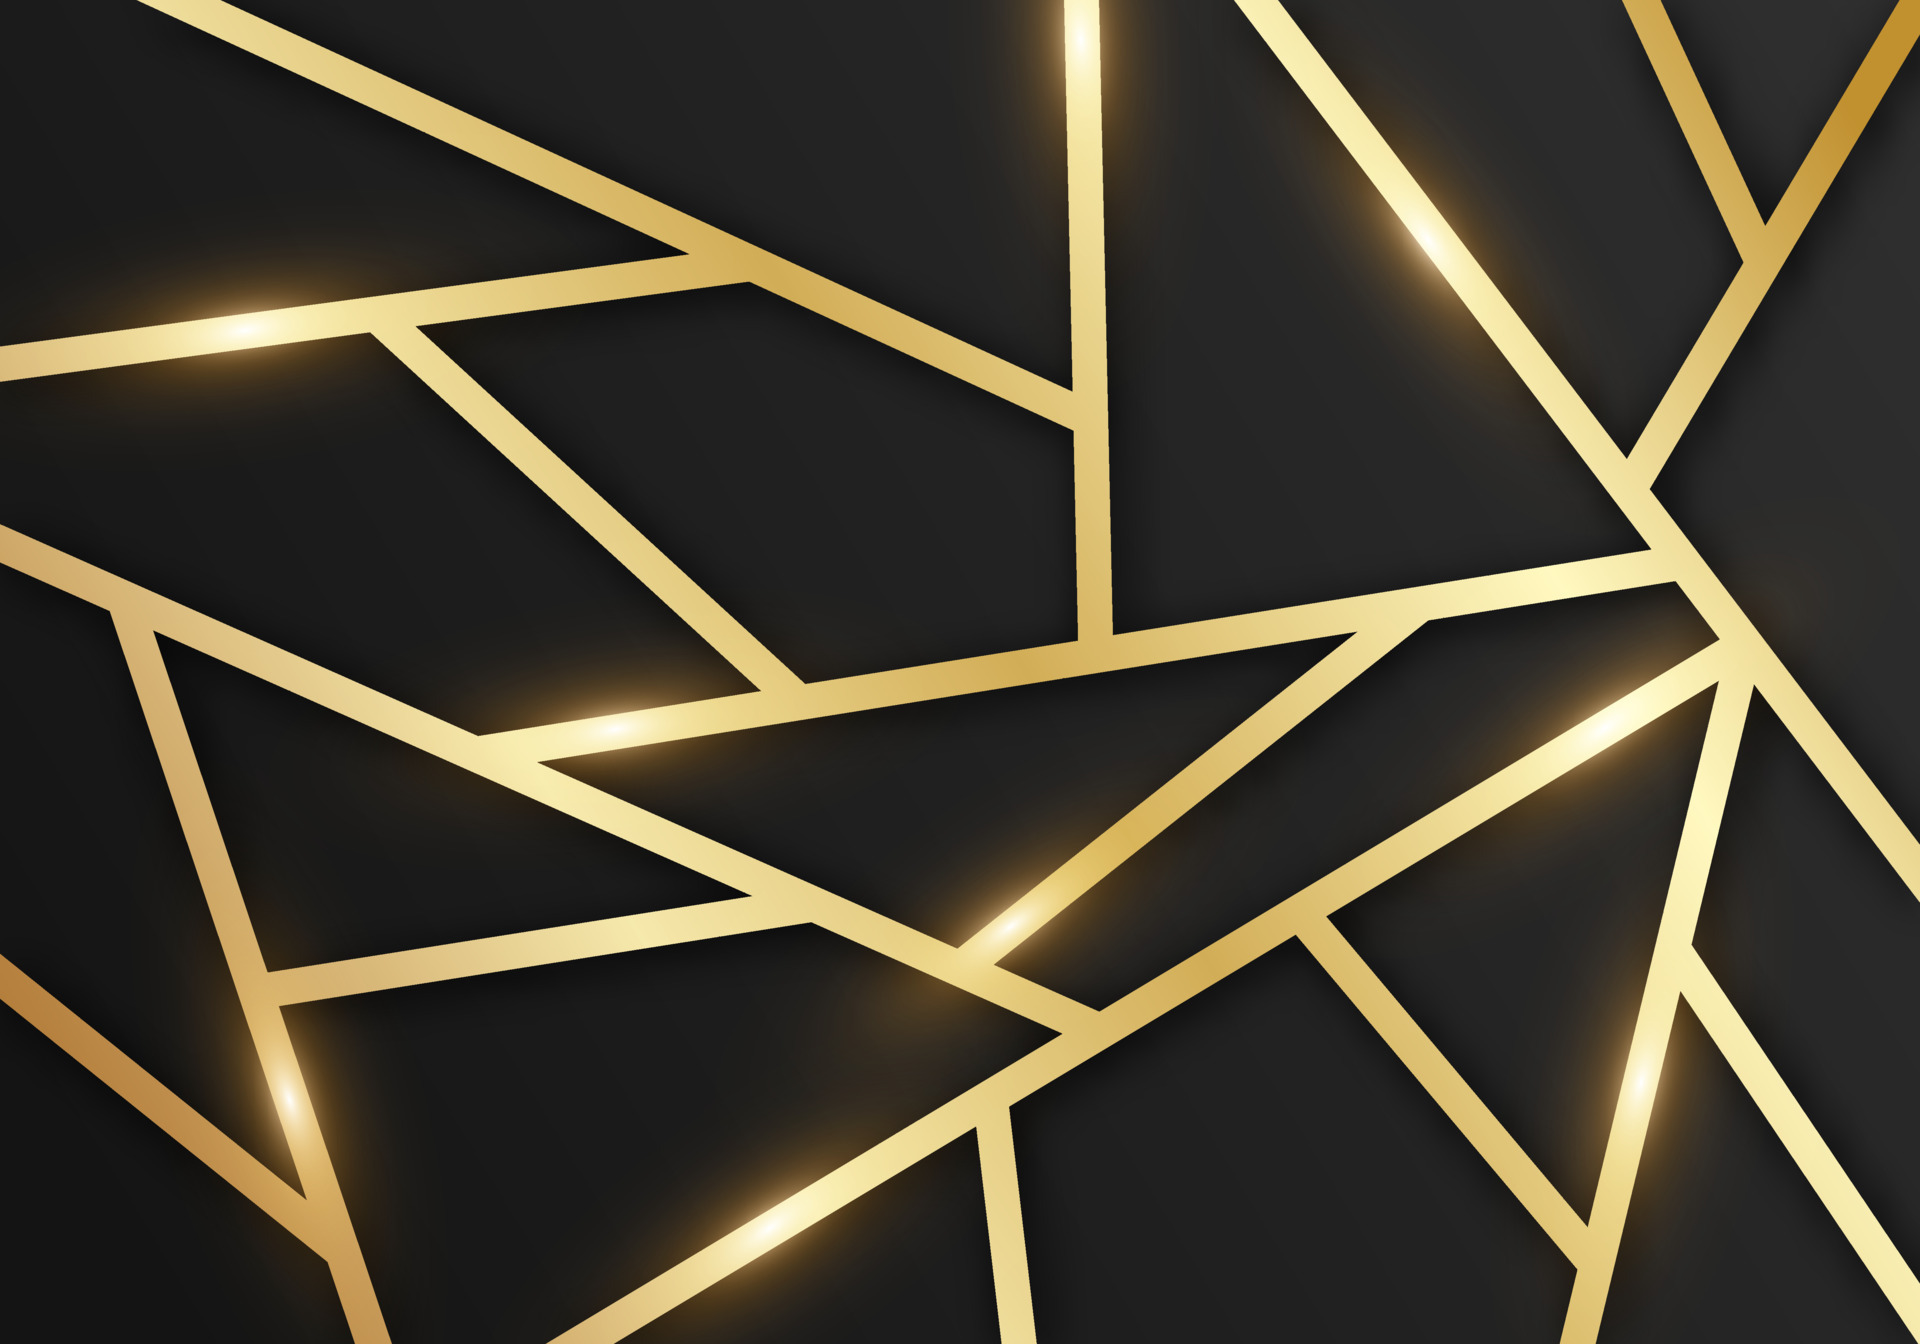 Abstract polygonal gold wallpaper and black Vector Image